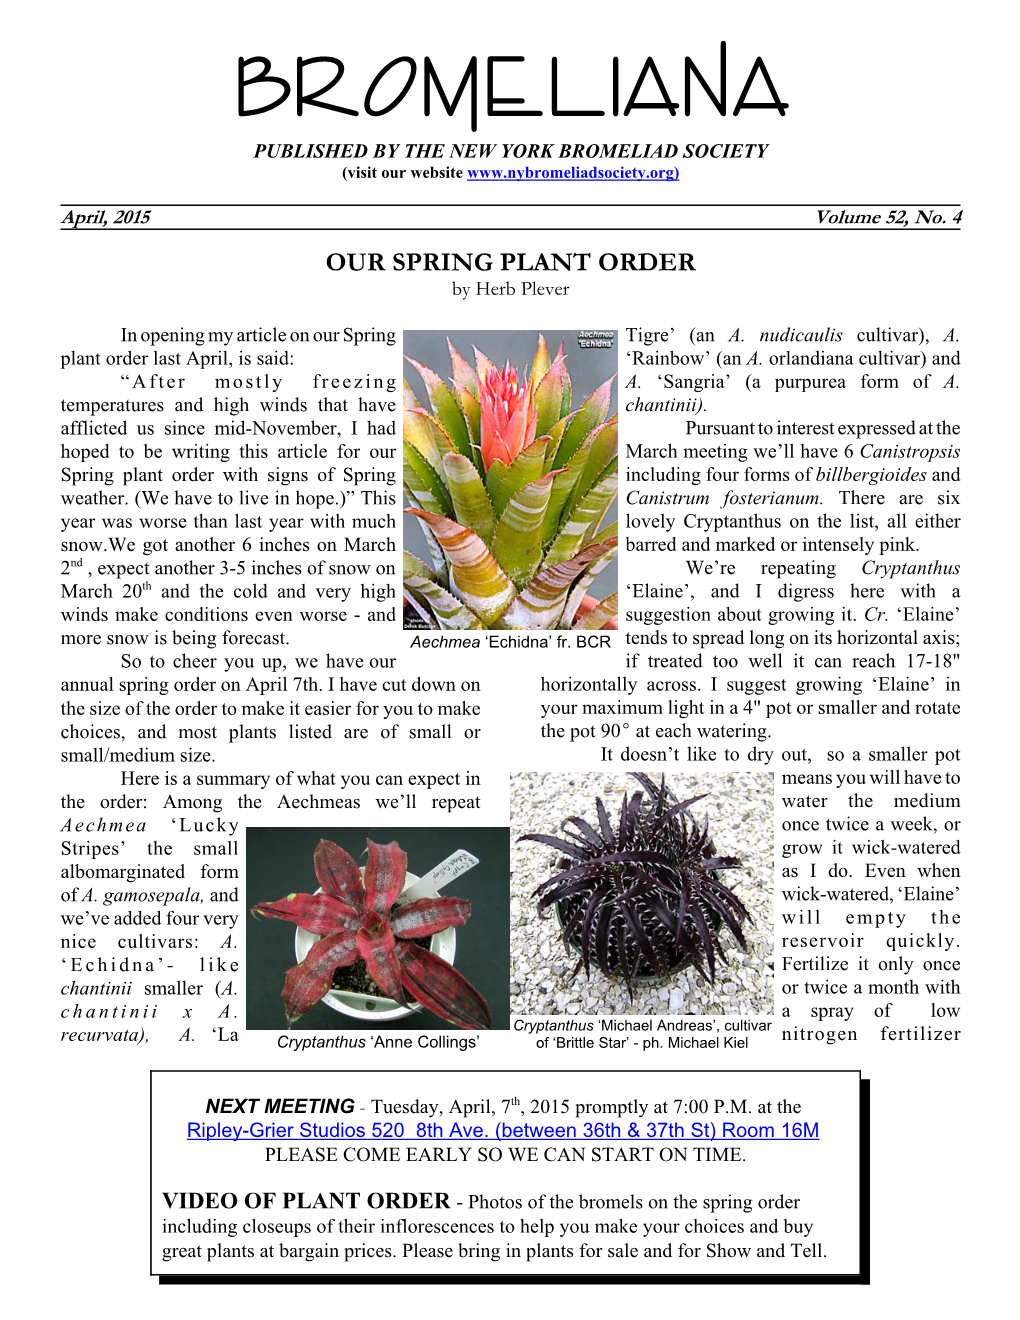 BROMELI ANA PUBLISHED by the NEW YORK BROMELIAD SOCIETY (Visit Our Website